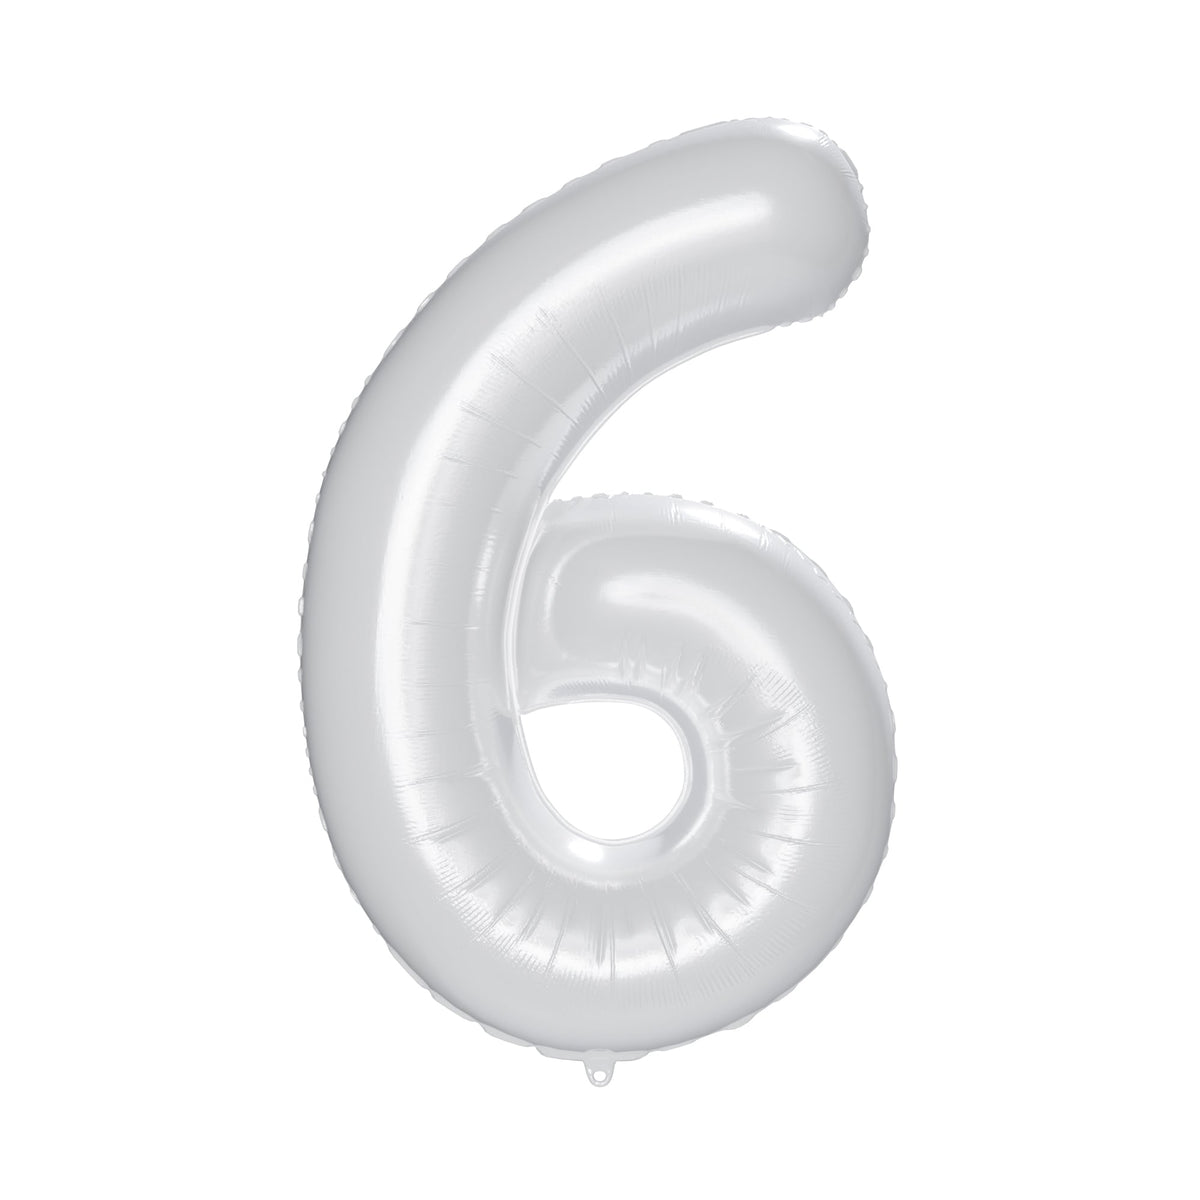 PARTYGRAM Balloons Frosty White Number 6 Foil Balloon, Matte Finish, 34 Inches, 1 Count 810077658208